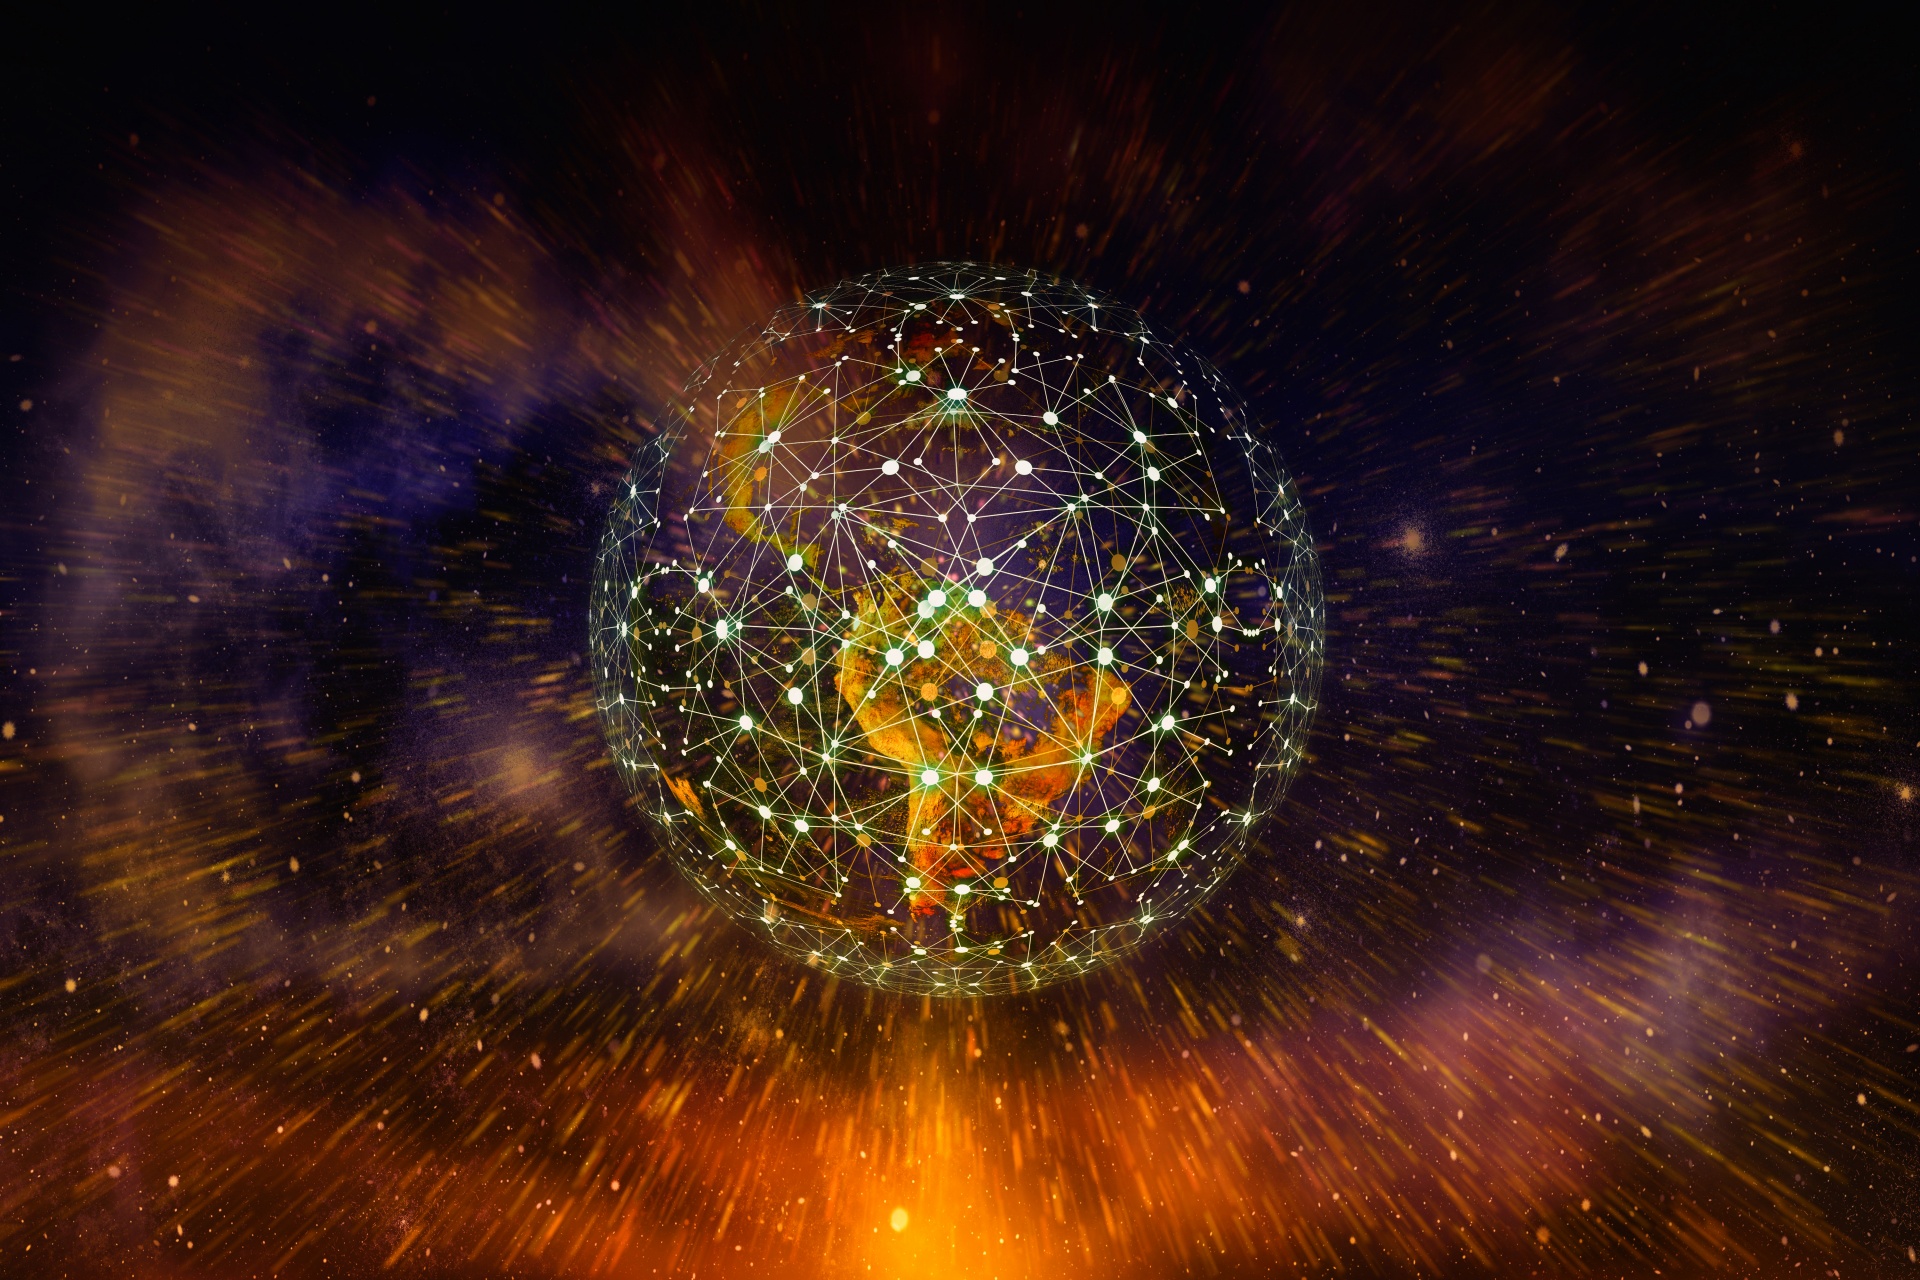 Globe unrestricted by global network in front of an expanding cosmos